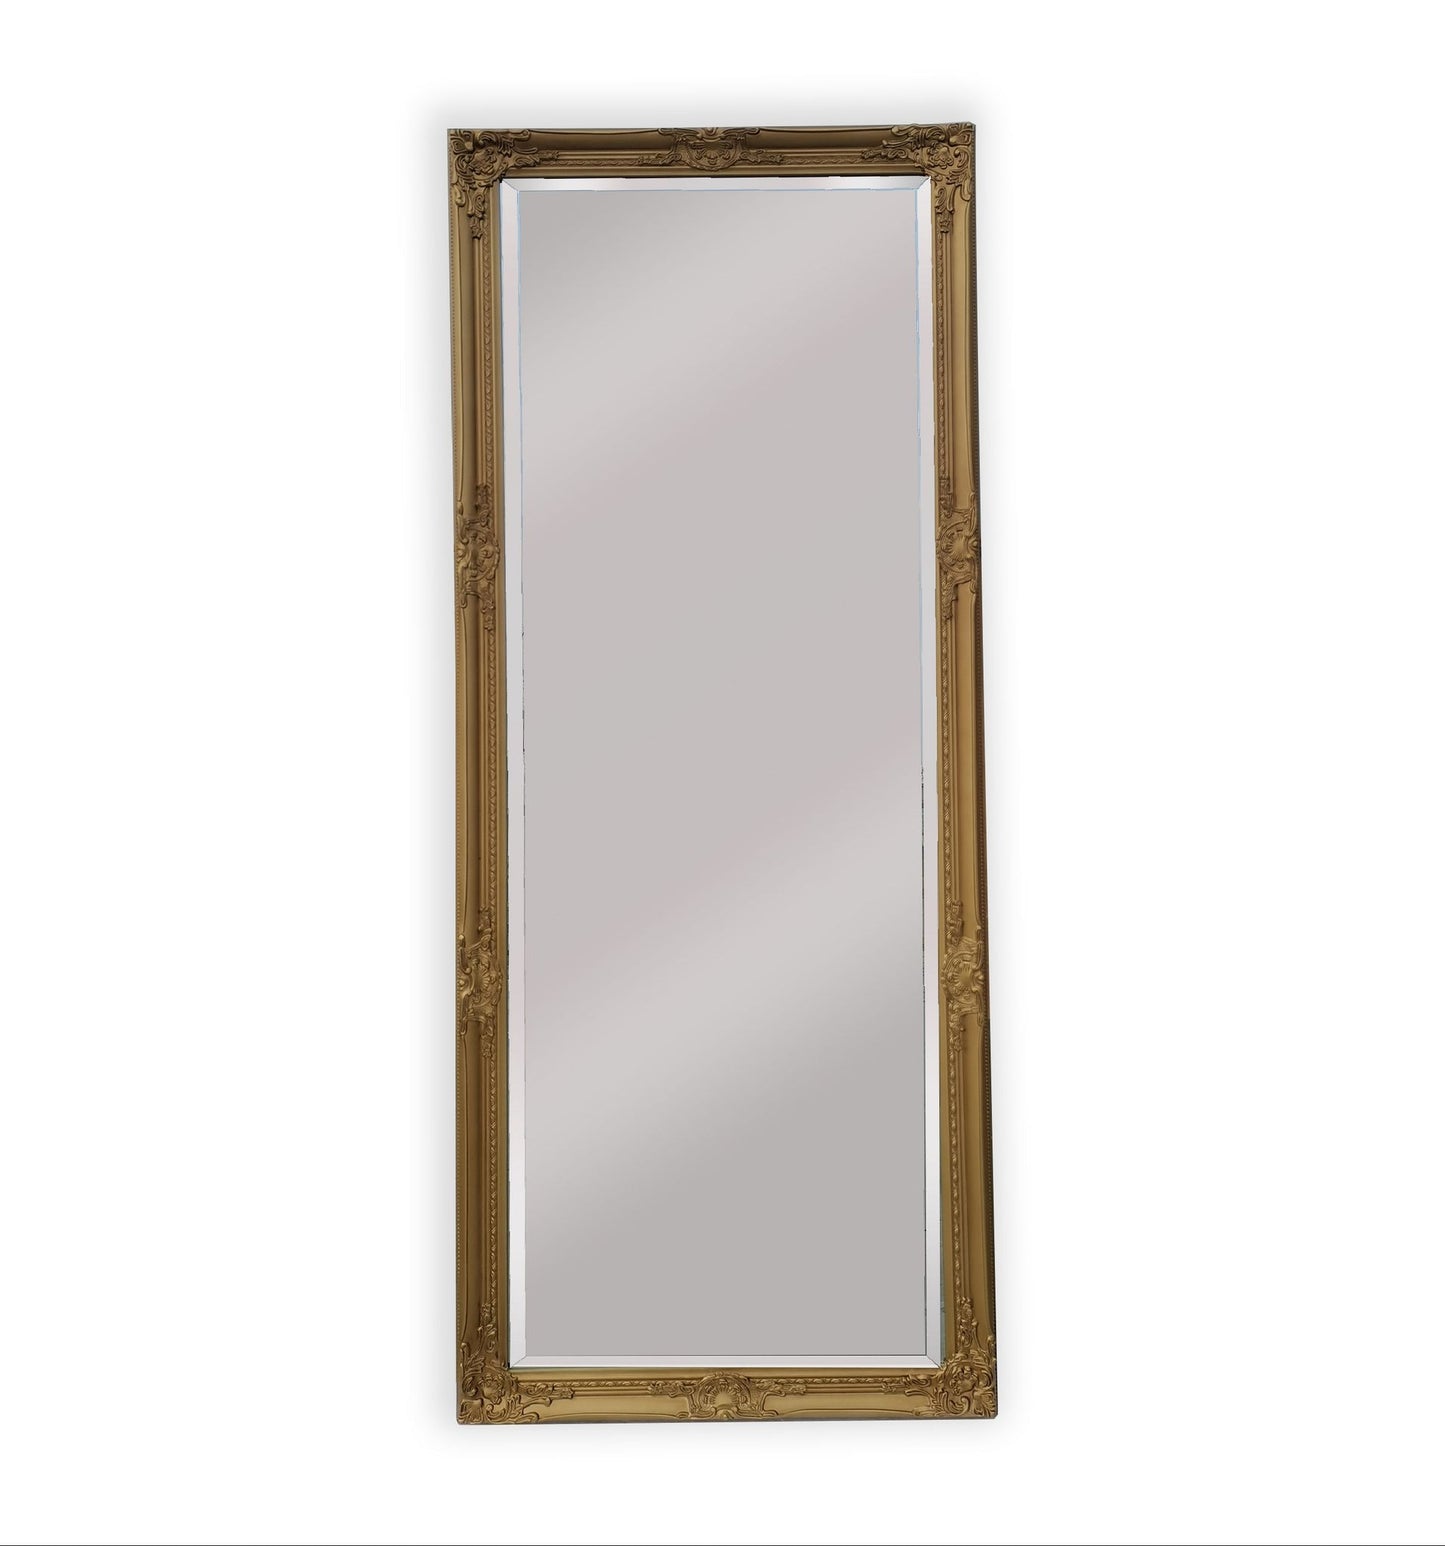 French Provincial Ornate Mirror - Country Gold - Medium 70cm x 170cm - image1